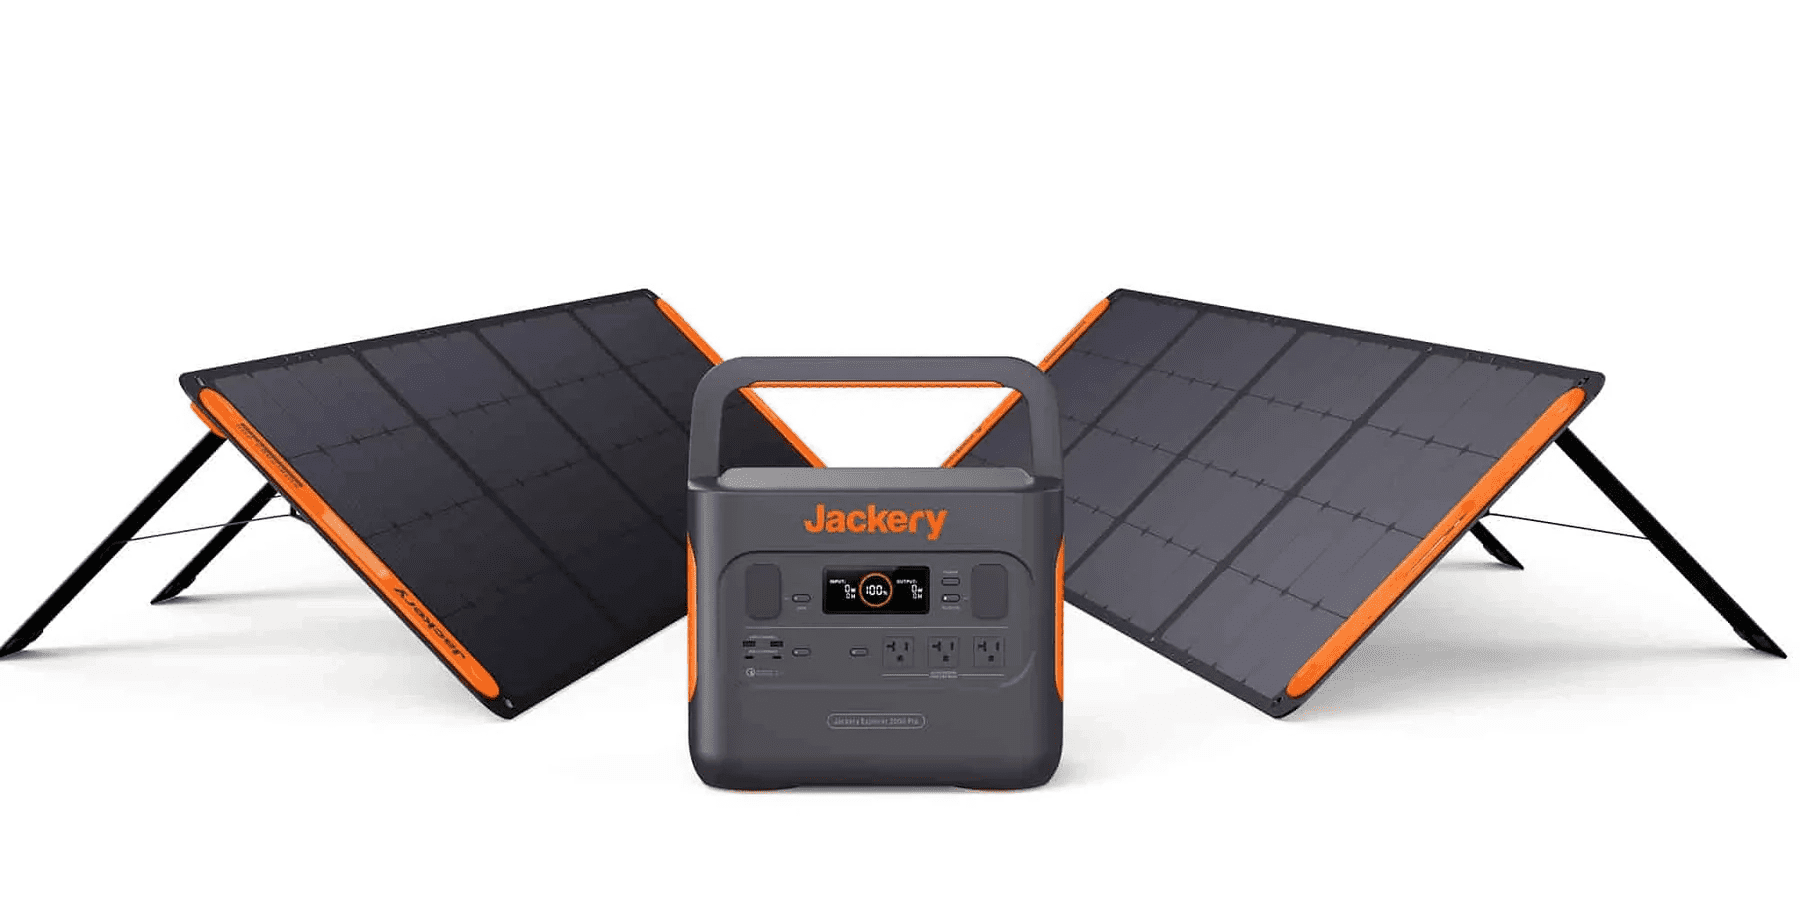 Jackery Solar Generator 2000 Pro kit with two compatible solar panels